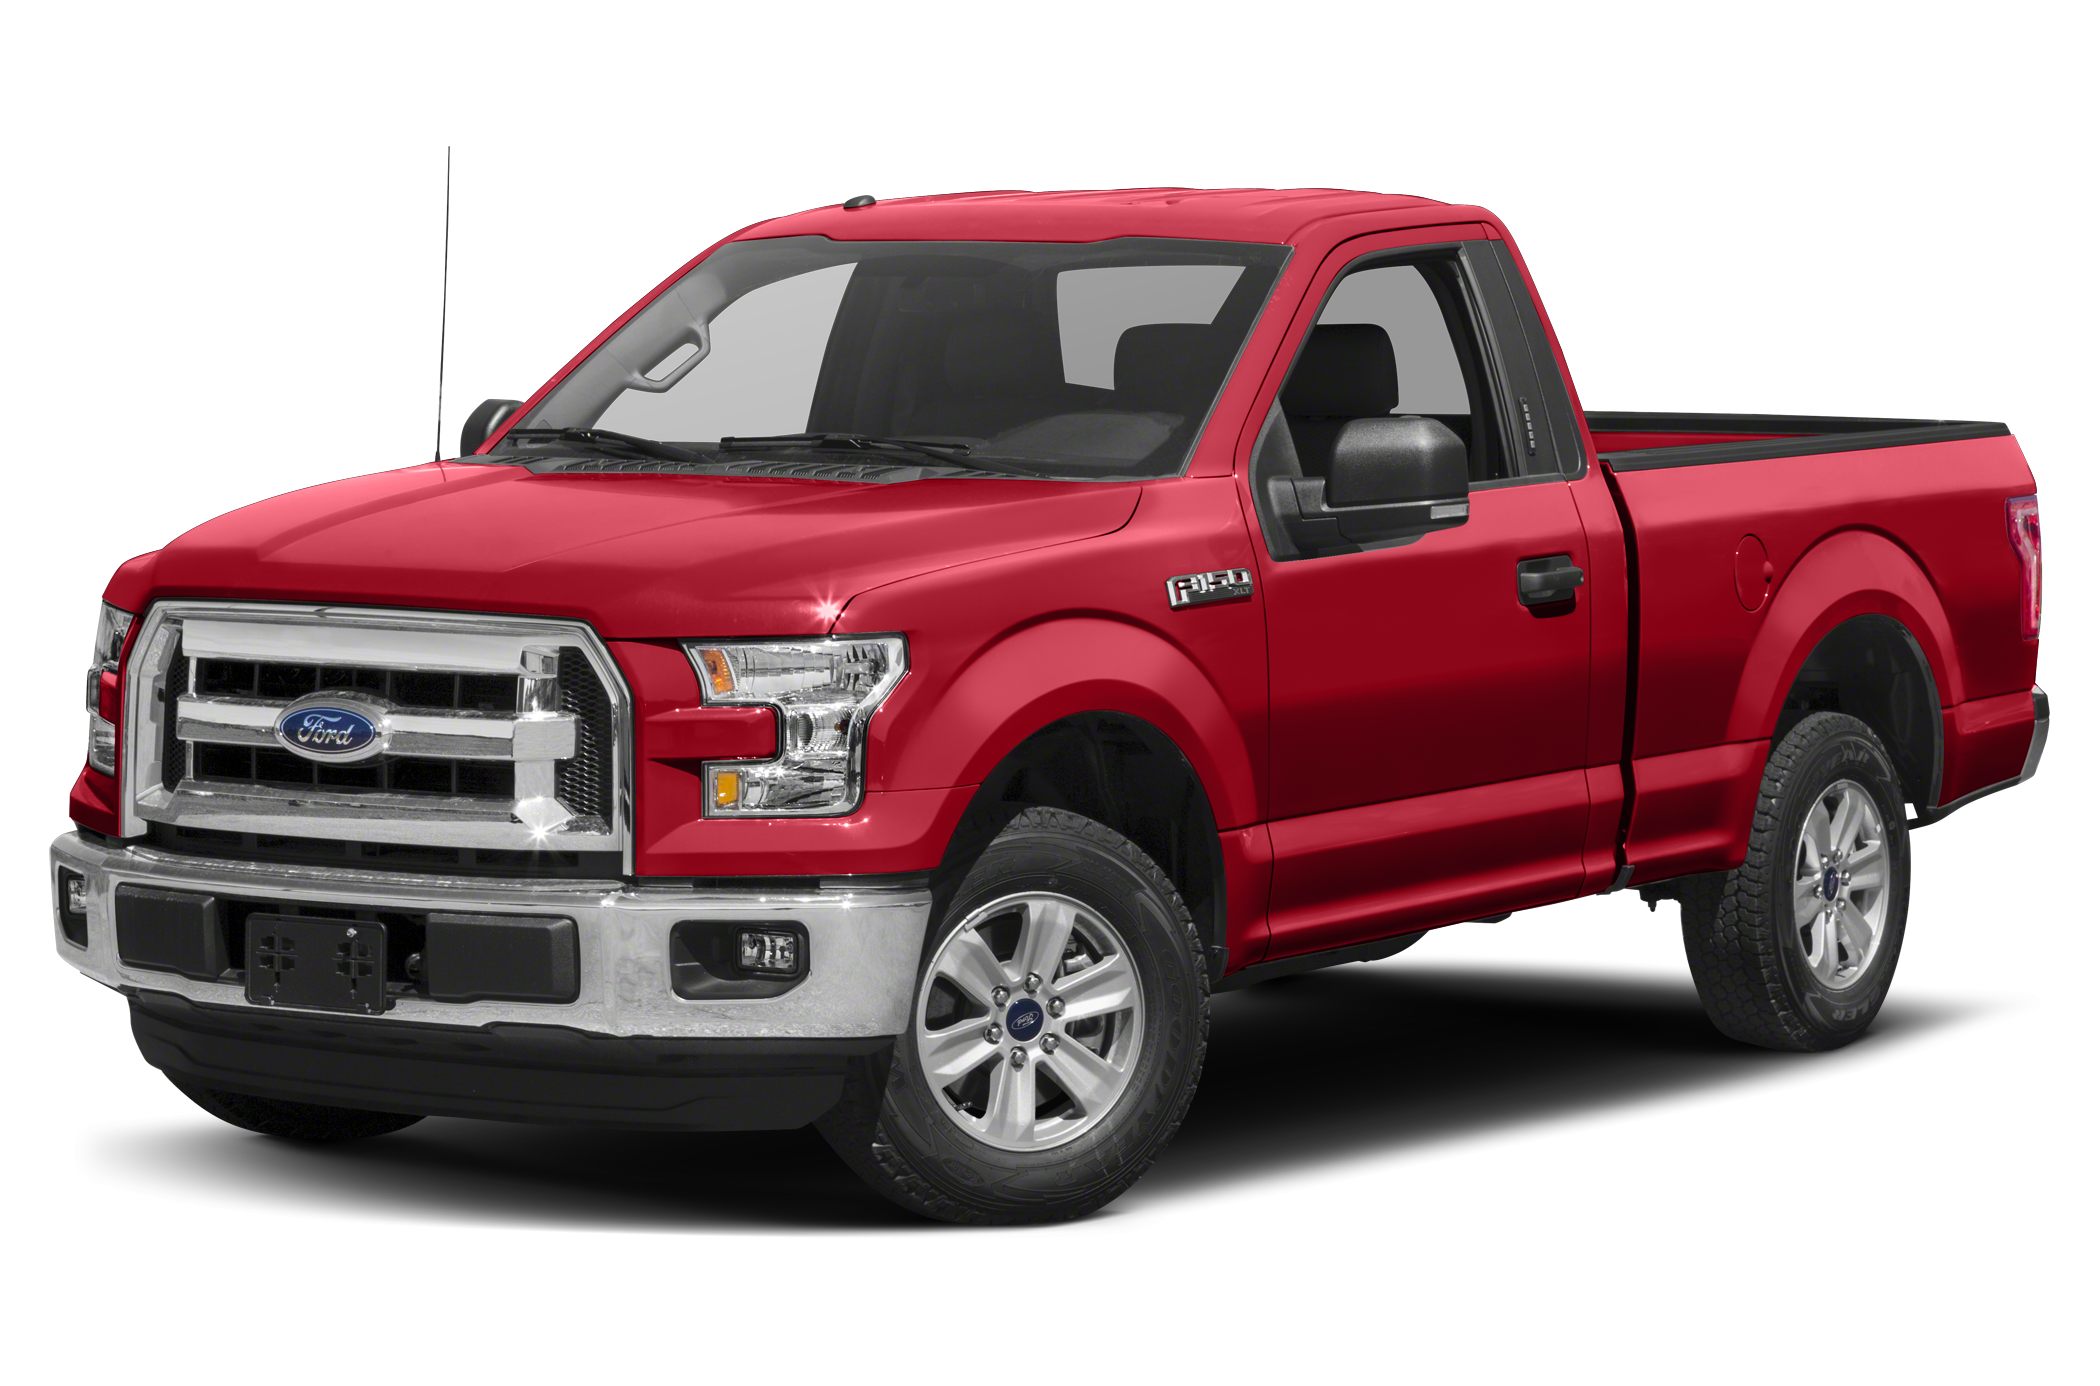 Great Deals on a new 2016 Ford F150 XLT 4x4 Regular Cab Styleside 8 ft